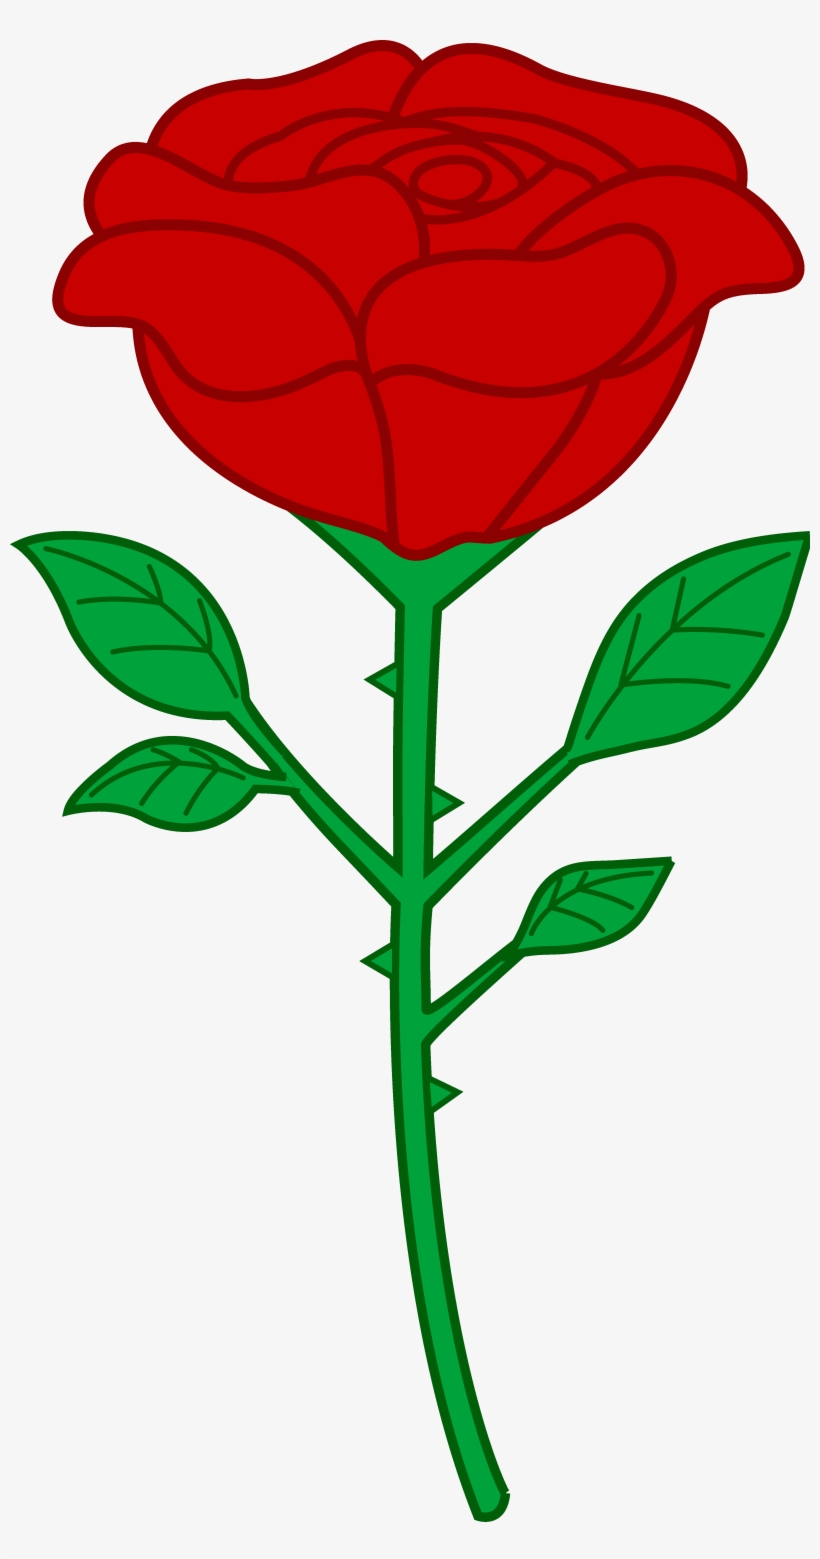 Rose With Thorns Drawing At Getdrawings - Clip Art Of Rose, transparent png #548357